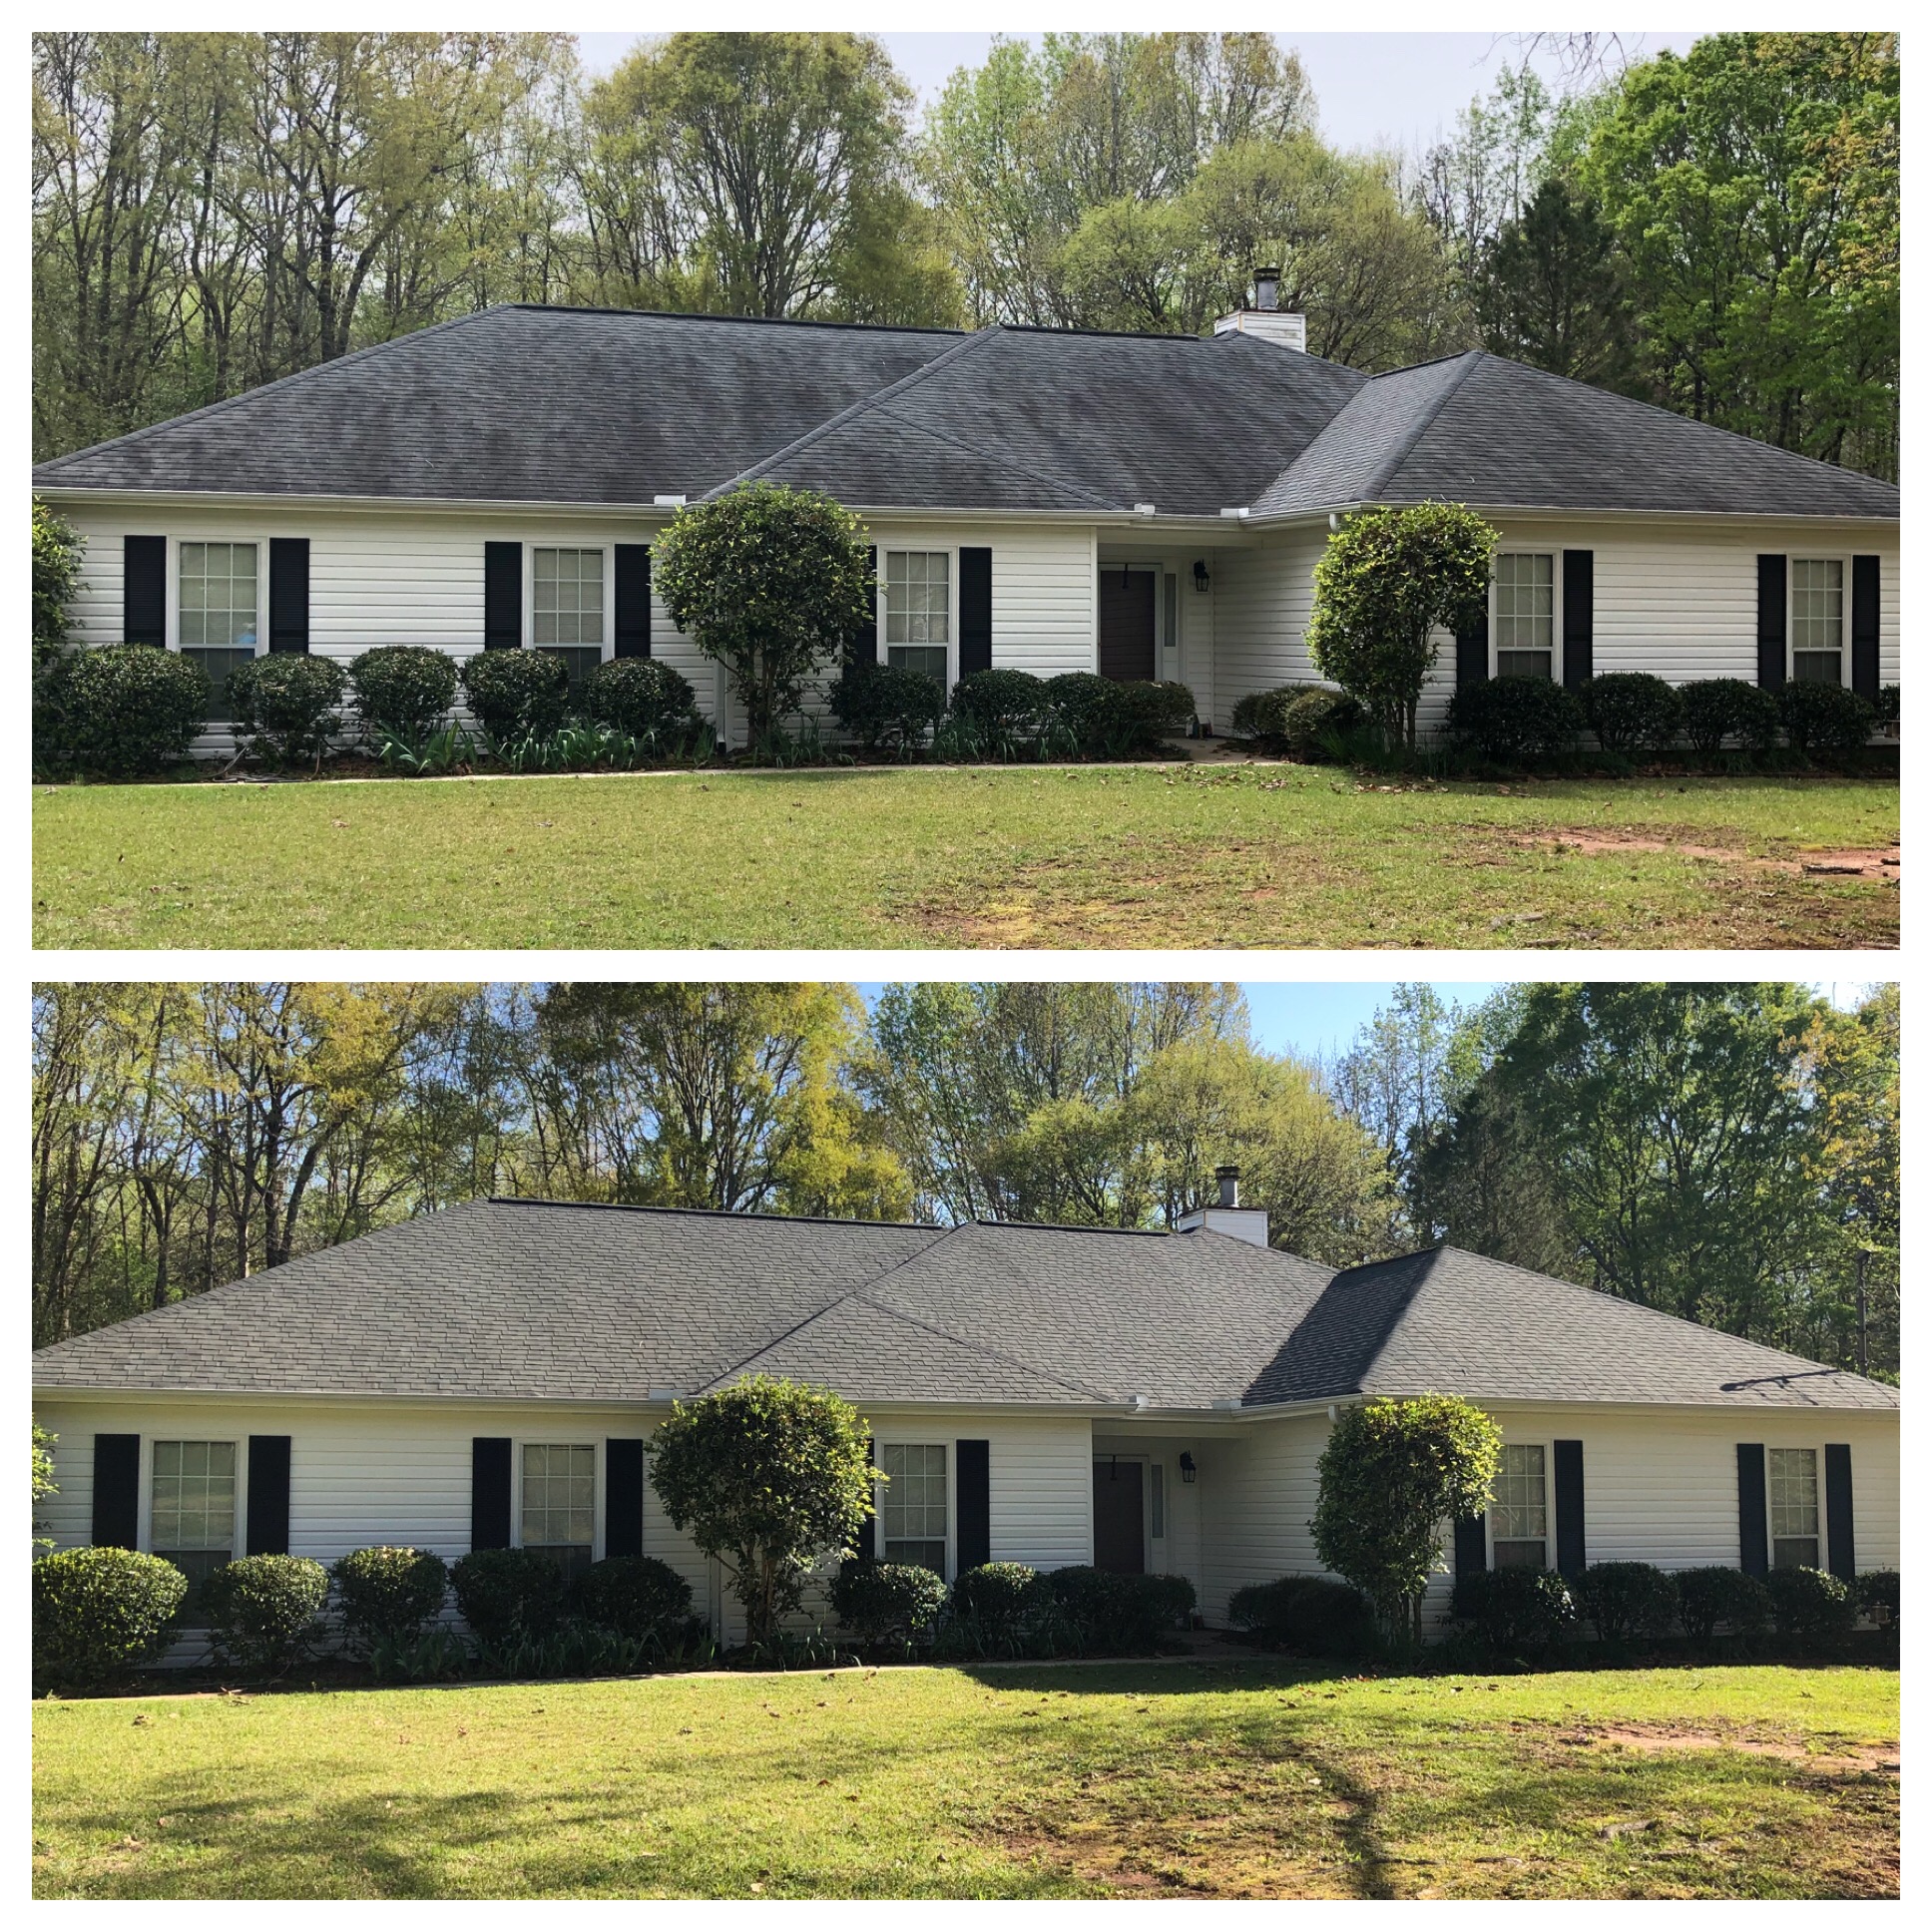 Astonishing Roof Washing Service Completed in Ladonia, AL